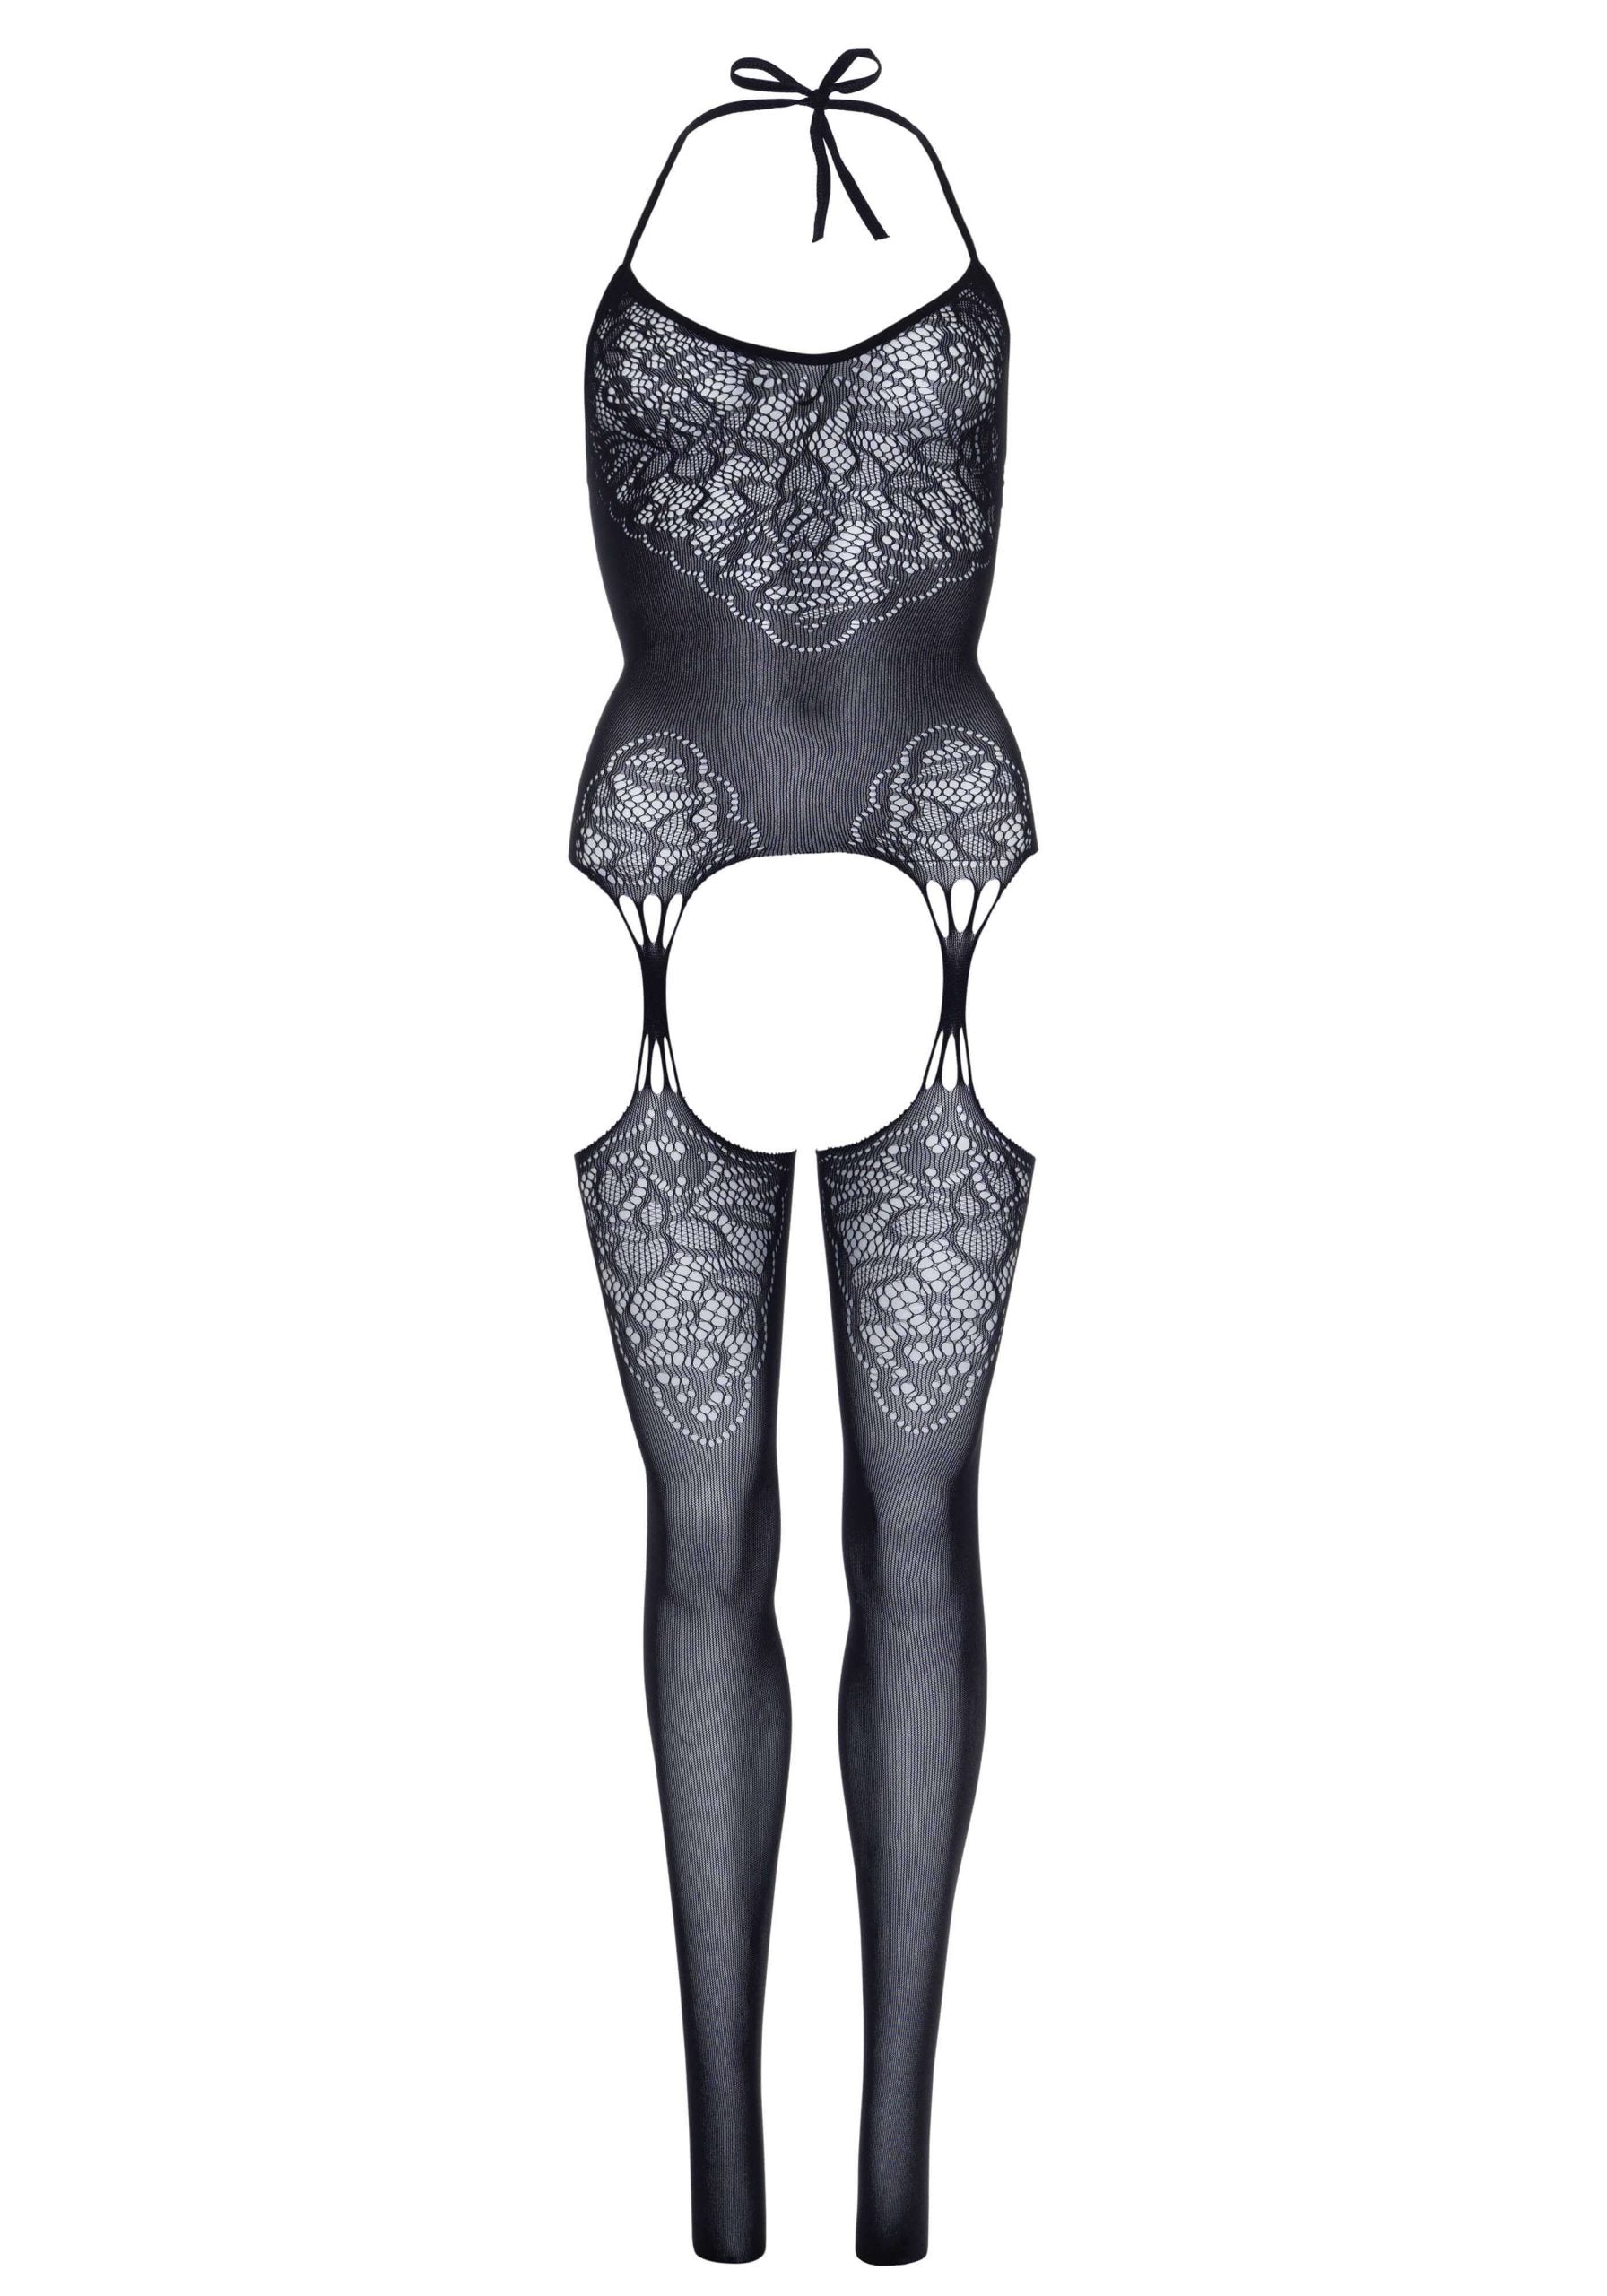 Vibrators, Sex Toy Kits and Sex Toys at Cloud9Adults - Leg Avenue Lace Suspender Bodystocking One Size - Buy Sex Toys Online